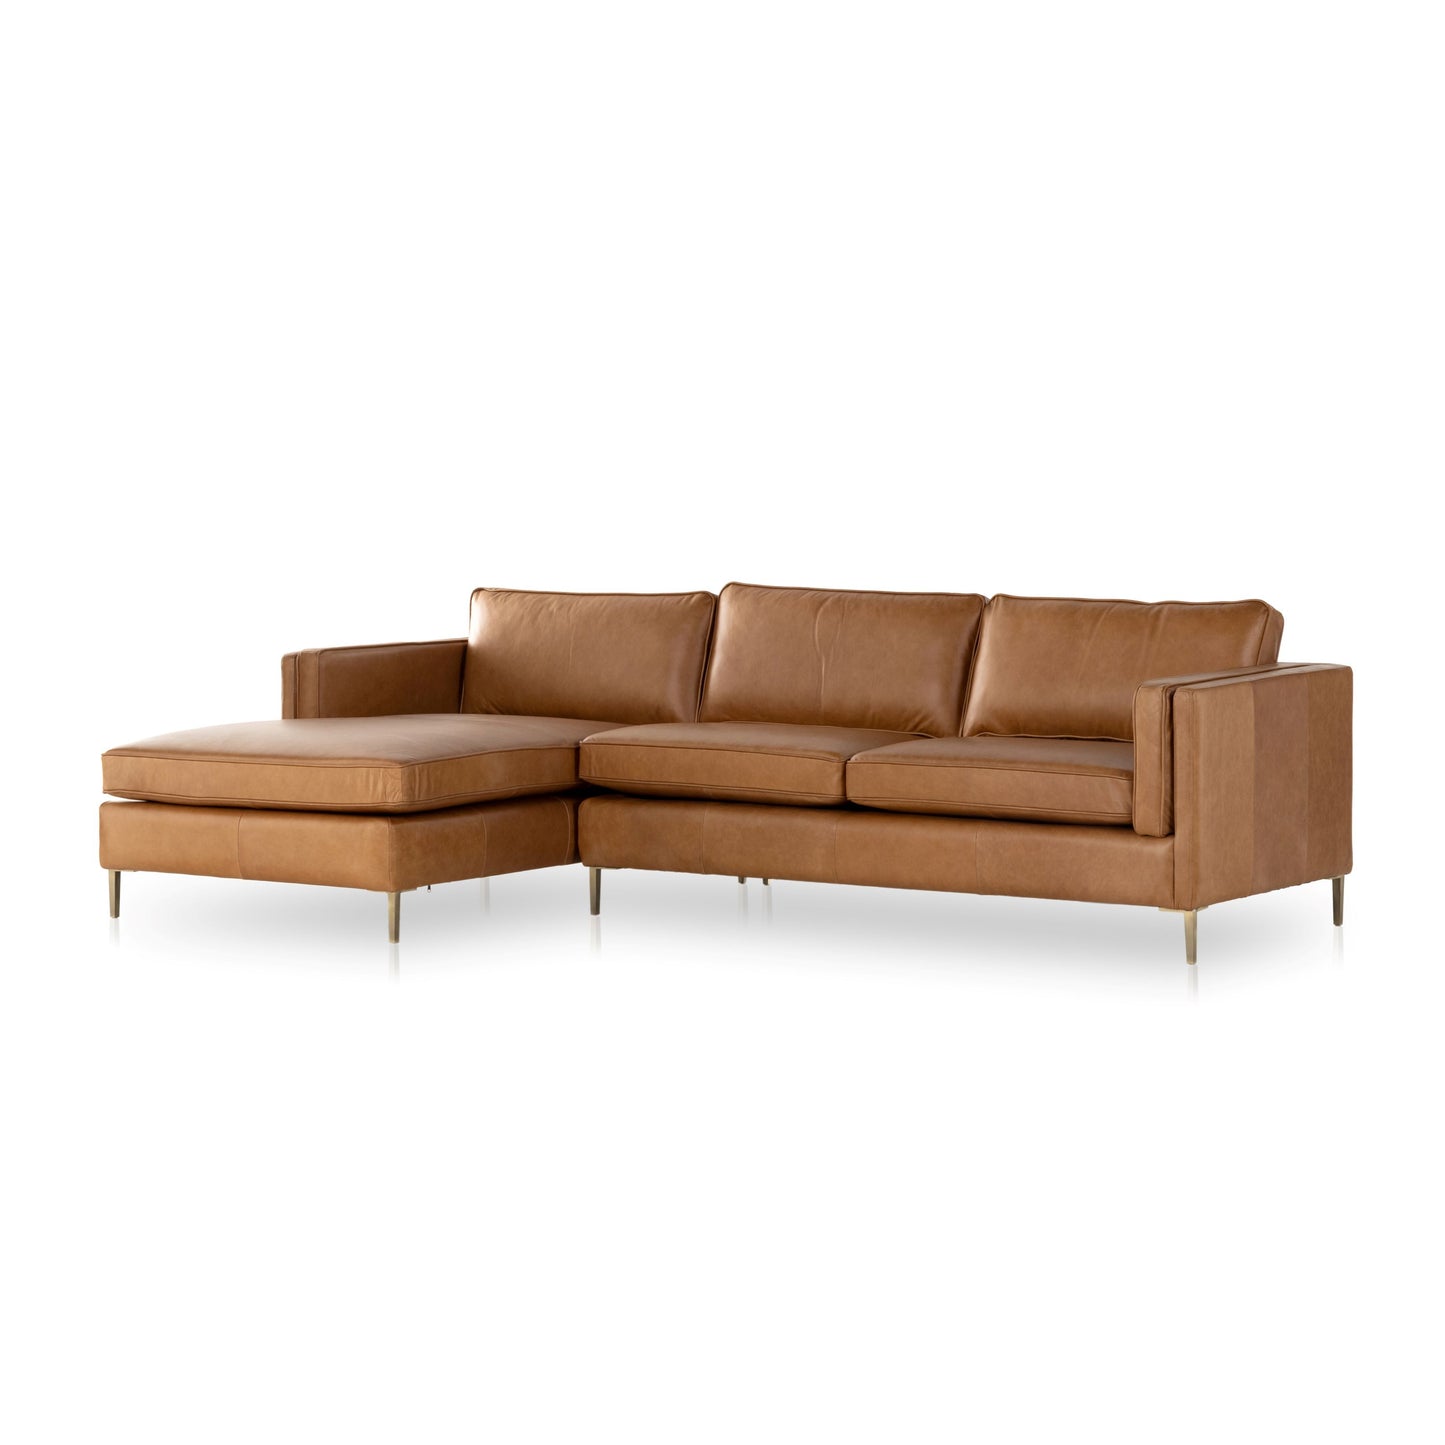 Load image into Gallery viewer, Emery 2pc Sectional Sonoma Butterscotch / Left FacingSectiona Sofa Four Hands  Sonoma Butterscotch Left Facing  Four Hands, Mid Century Modern Furniture, Old Bones Furniture Company, Old Bones Co, Modern Mid Century, Designer Furniture, https://www.oldbonesco.com/
